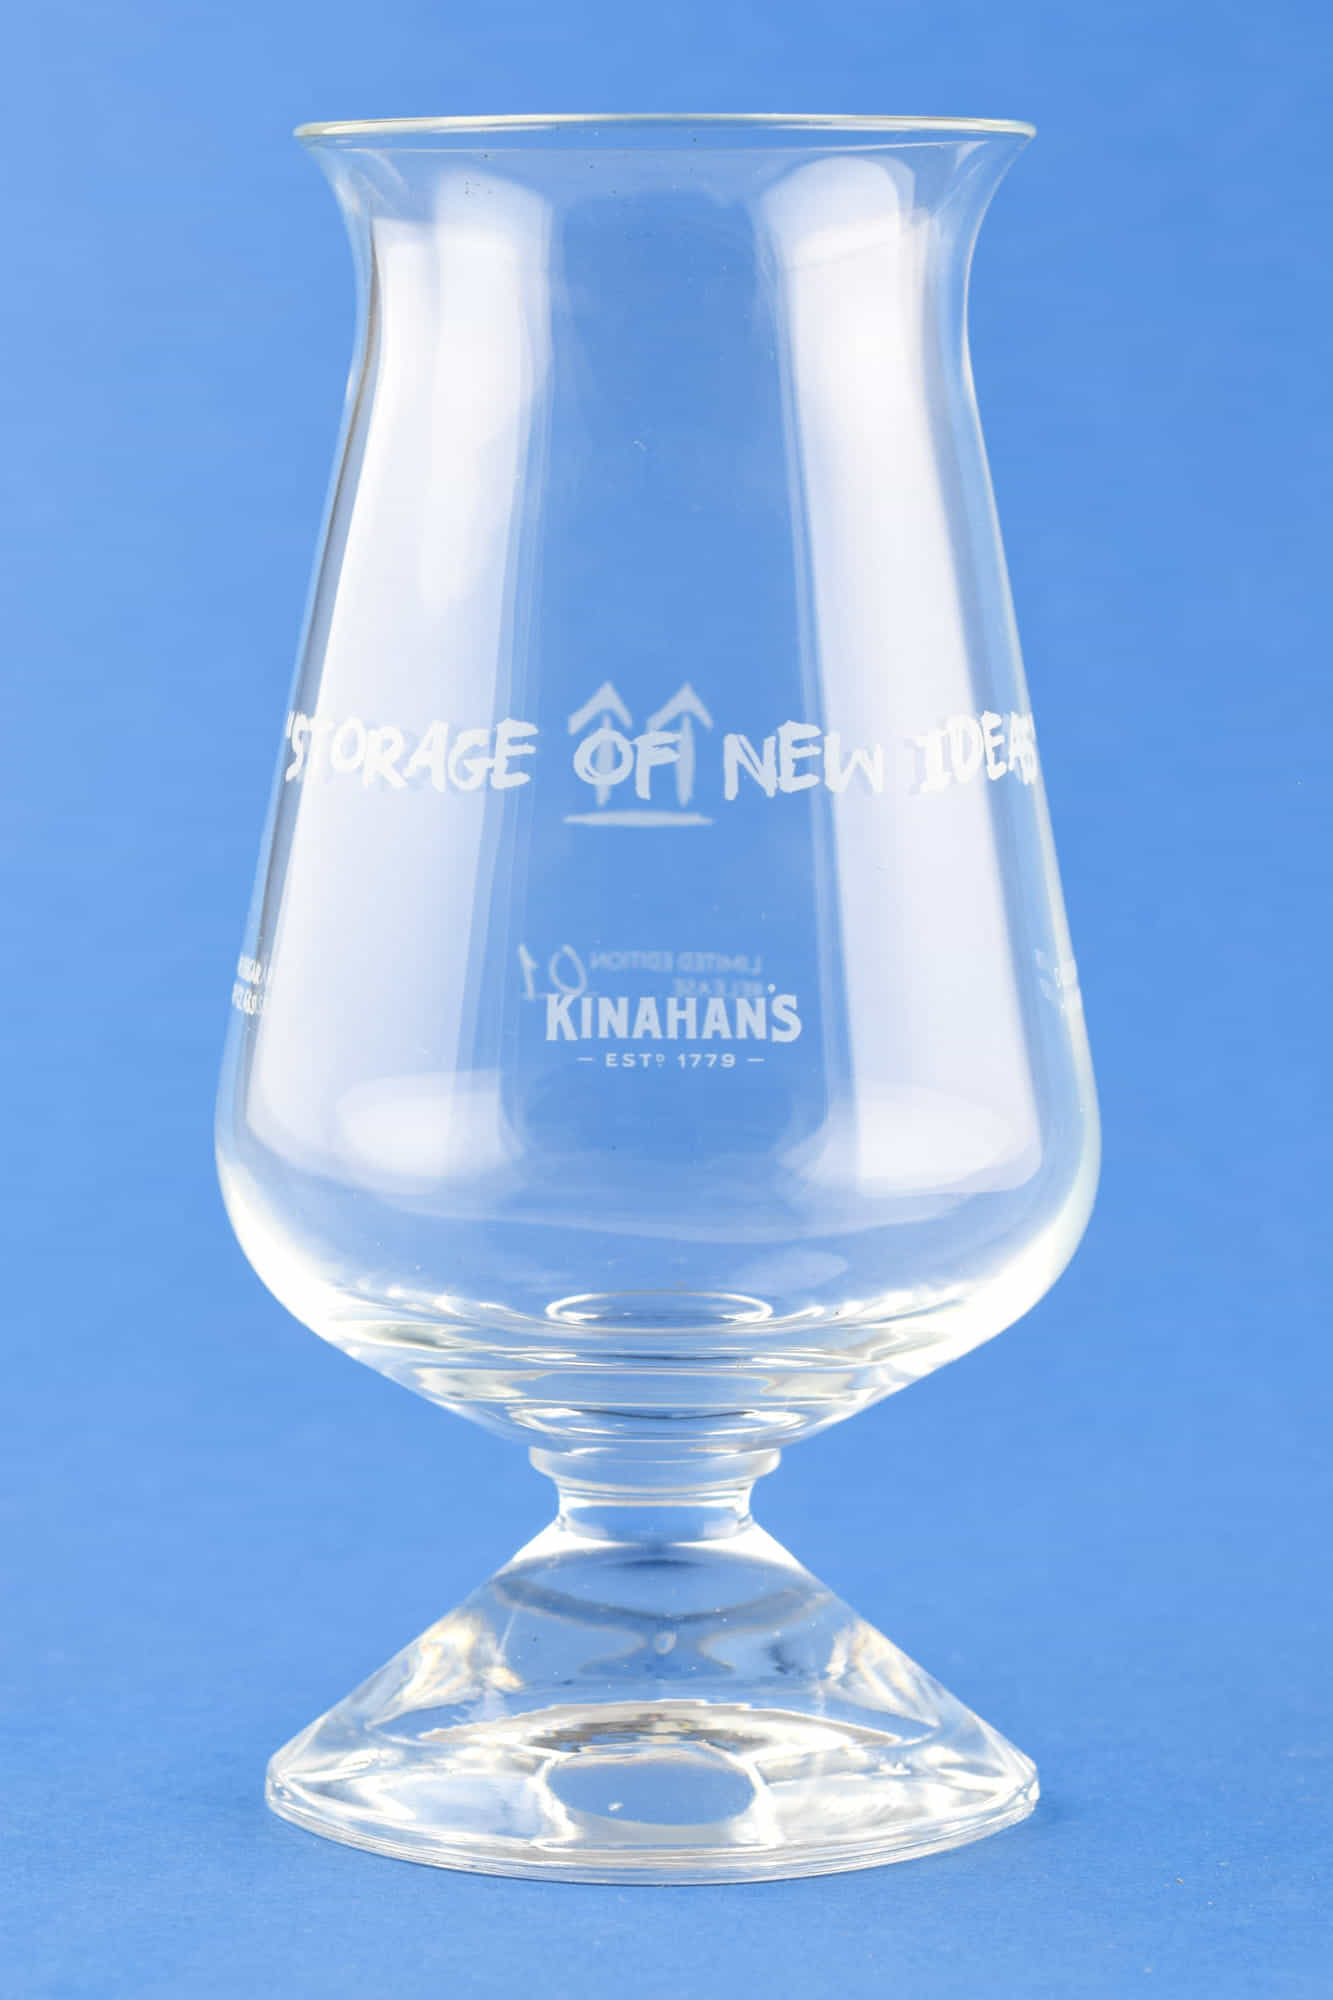 Malts 0,7l zwei at of >> of Home M Home & The explore Malts now! 45%vol. Gläser Kasc | Kinahan\'s